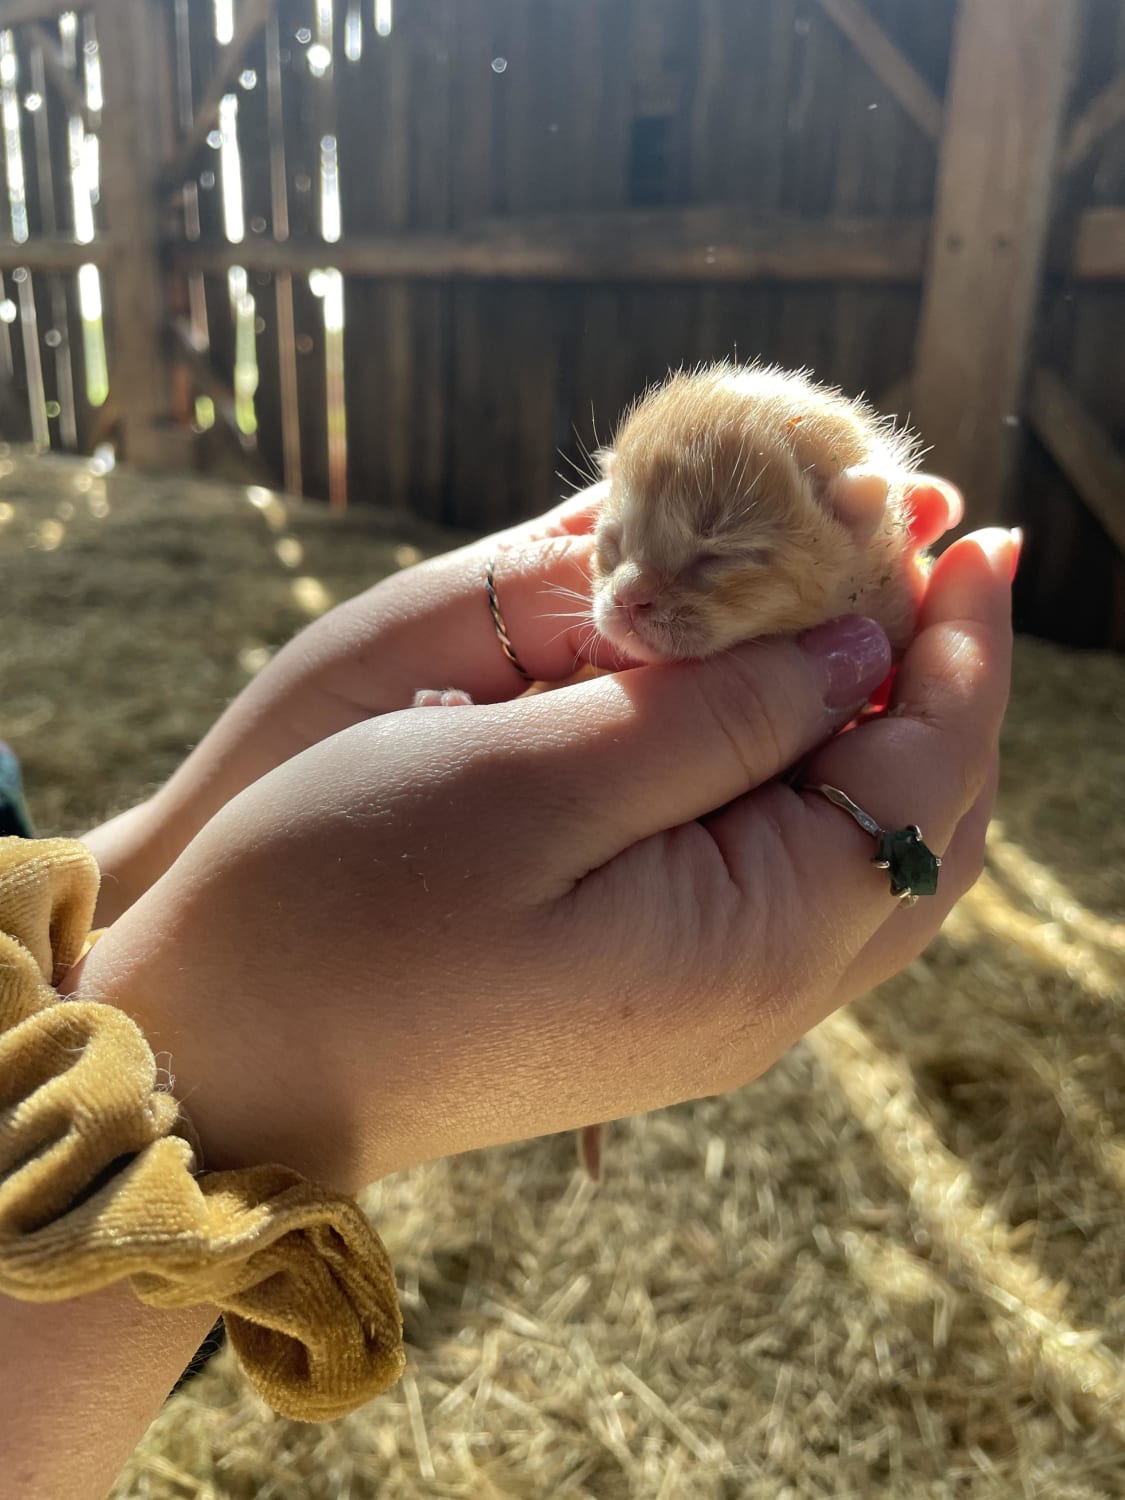 We found baby kittens in a barn and my heart is melting